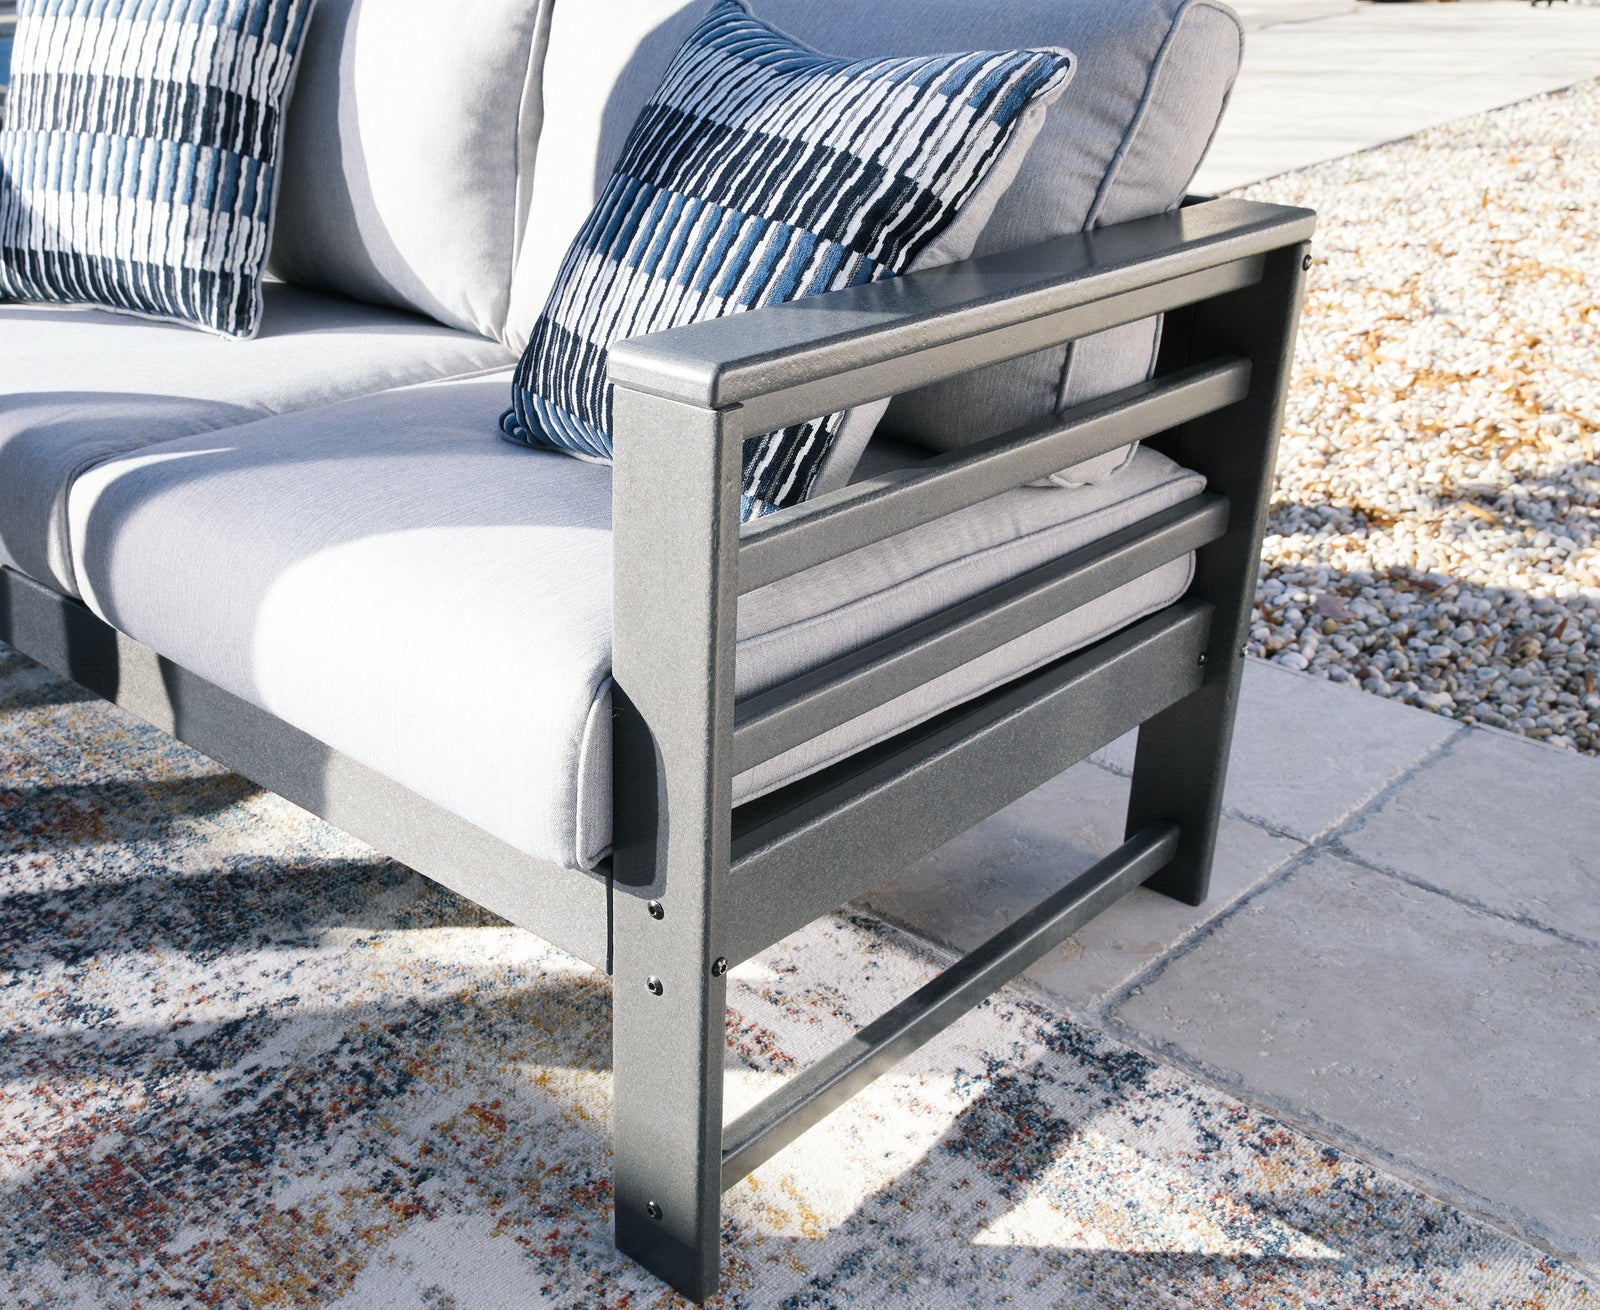 Amora Charcoal Gray Outdoor Loveseat With Coffee Table - Ella Furniture